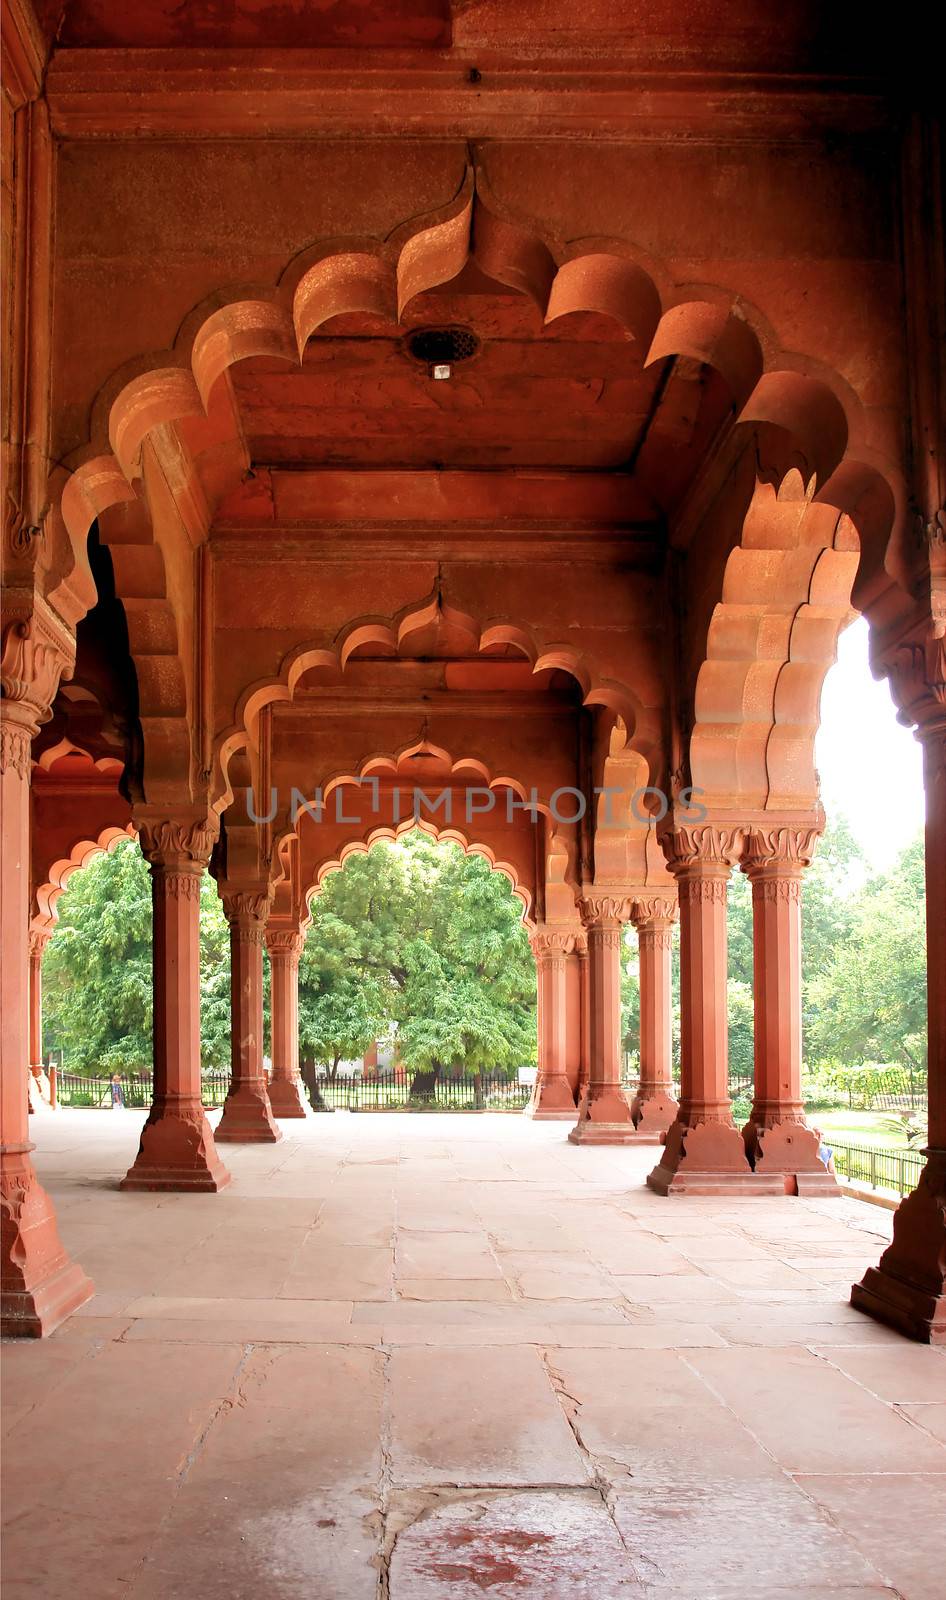 Famous Delhi Fort also known as Lal Qil'ah, UNESCO World Heritage Site